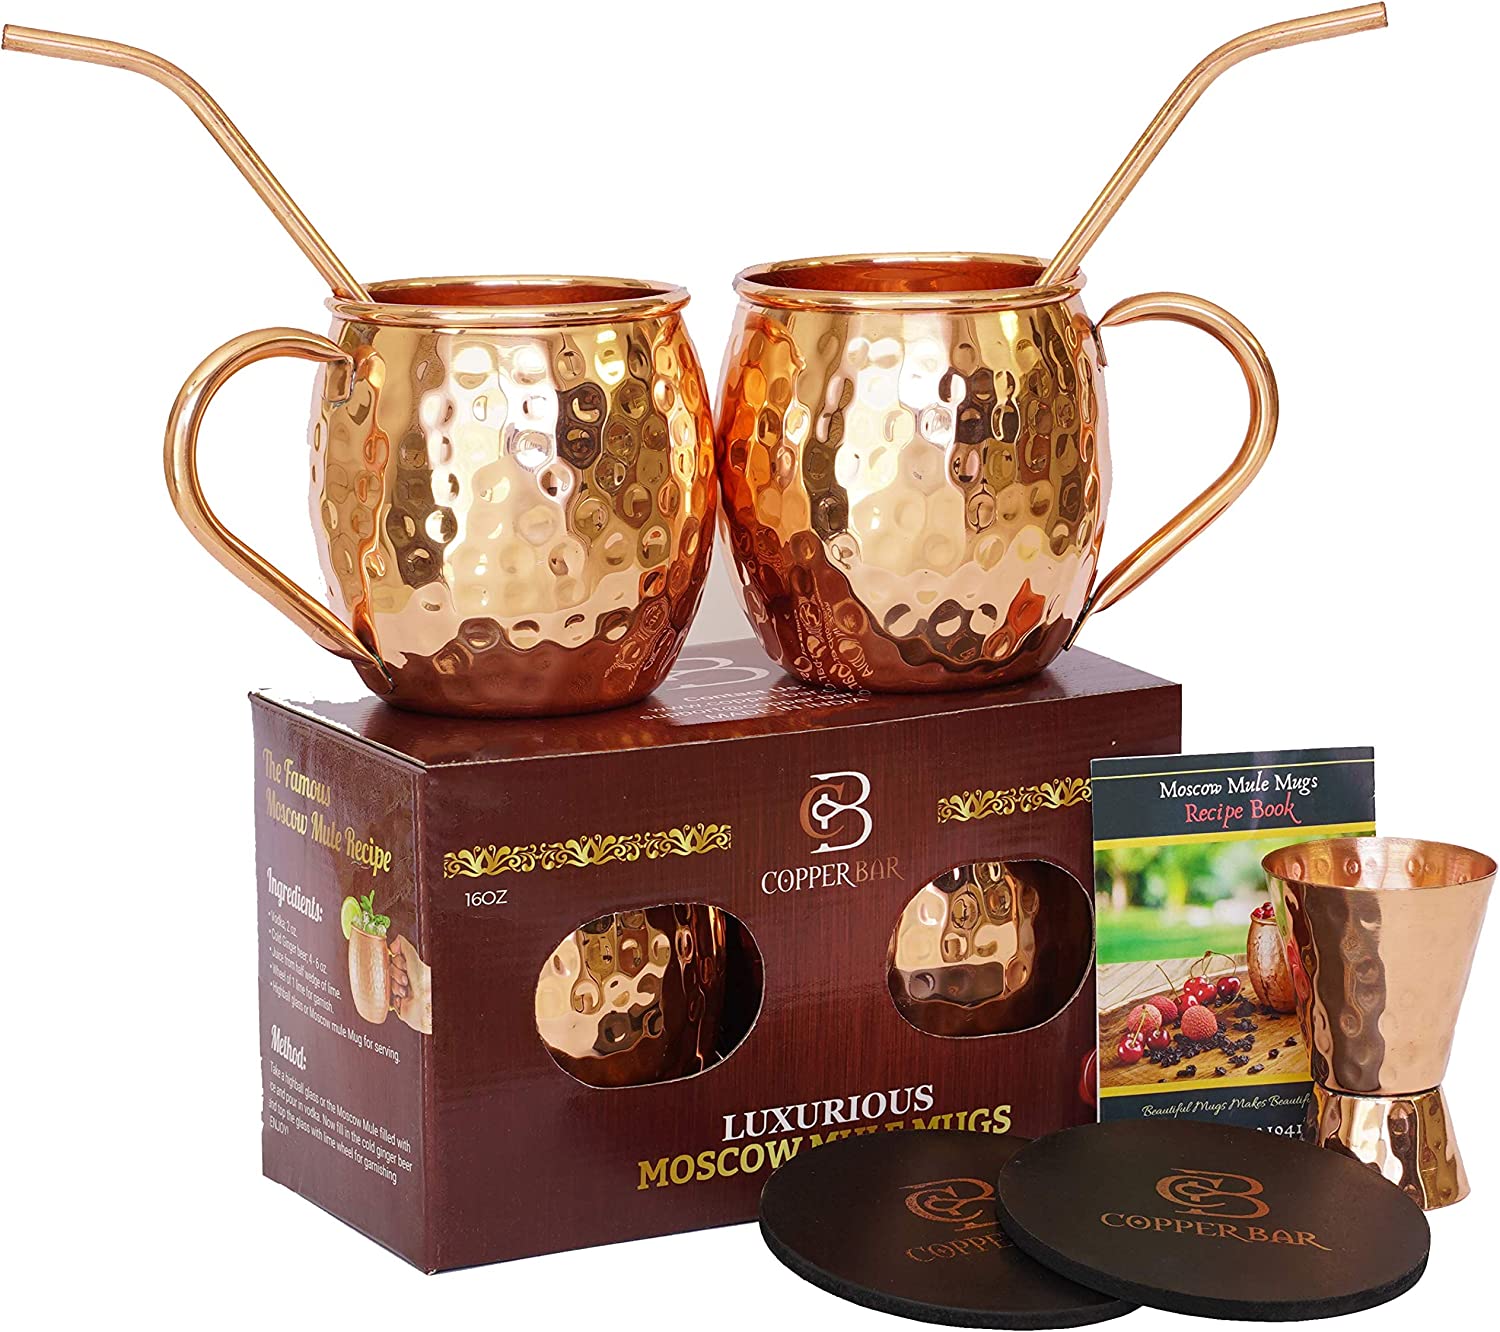 Moscow Mule Copper Mugs - Set of 2 - 100% HANDCRAFTED Pure Solid Copper Mugs - 16 oz Gift Set with Cocktail Copper Straws, Jigger & 2 Coasters by Copper-Bar